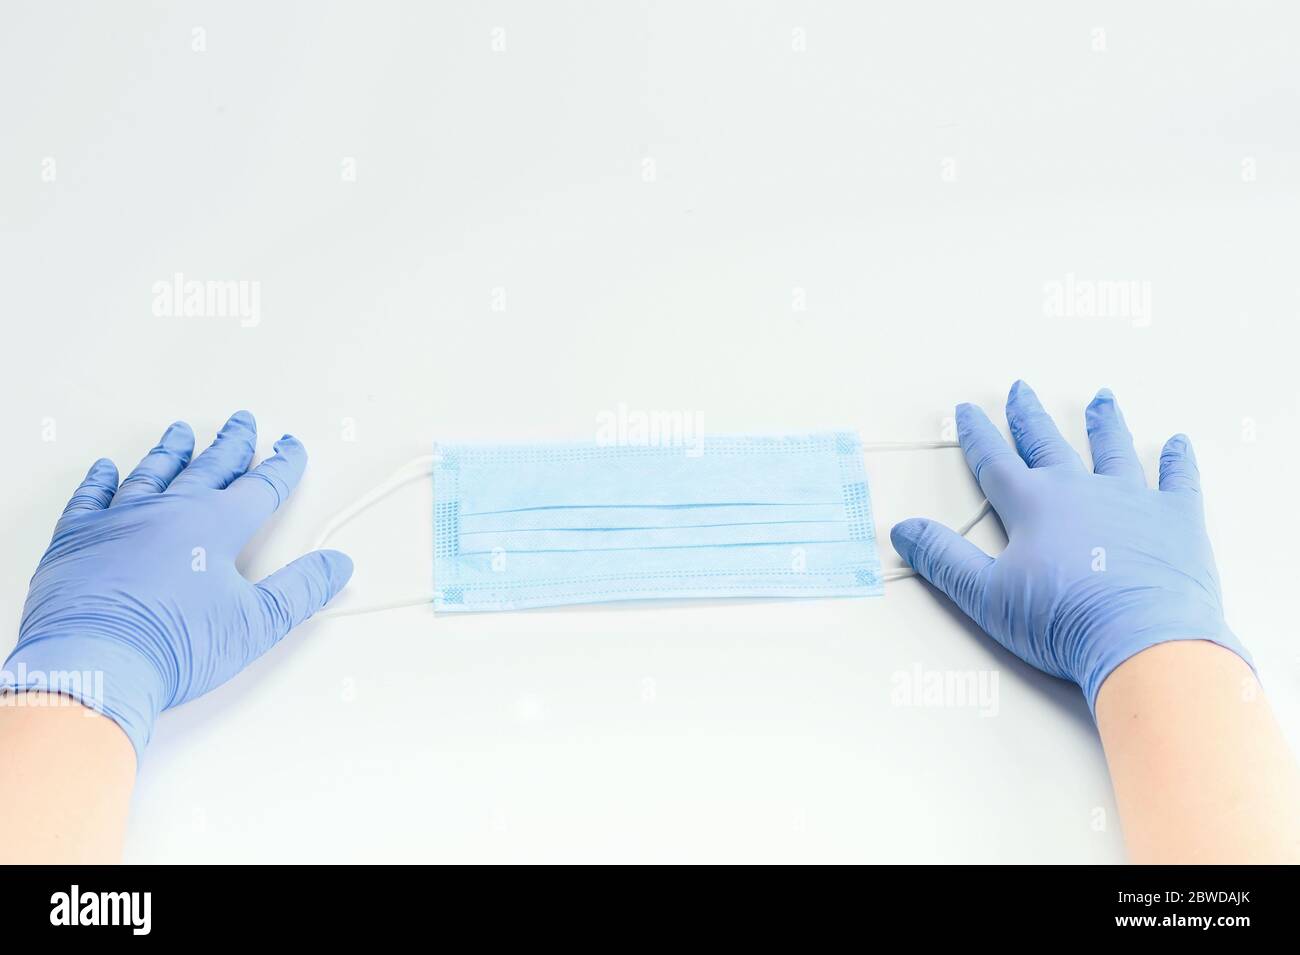 Hands  in gloves holding surgical mask. Coronavirus outbreak concept. Healthcare concept. Horizontal with space for text. Stock Photo